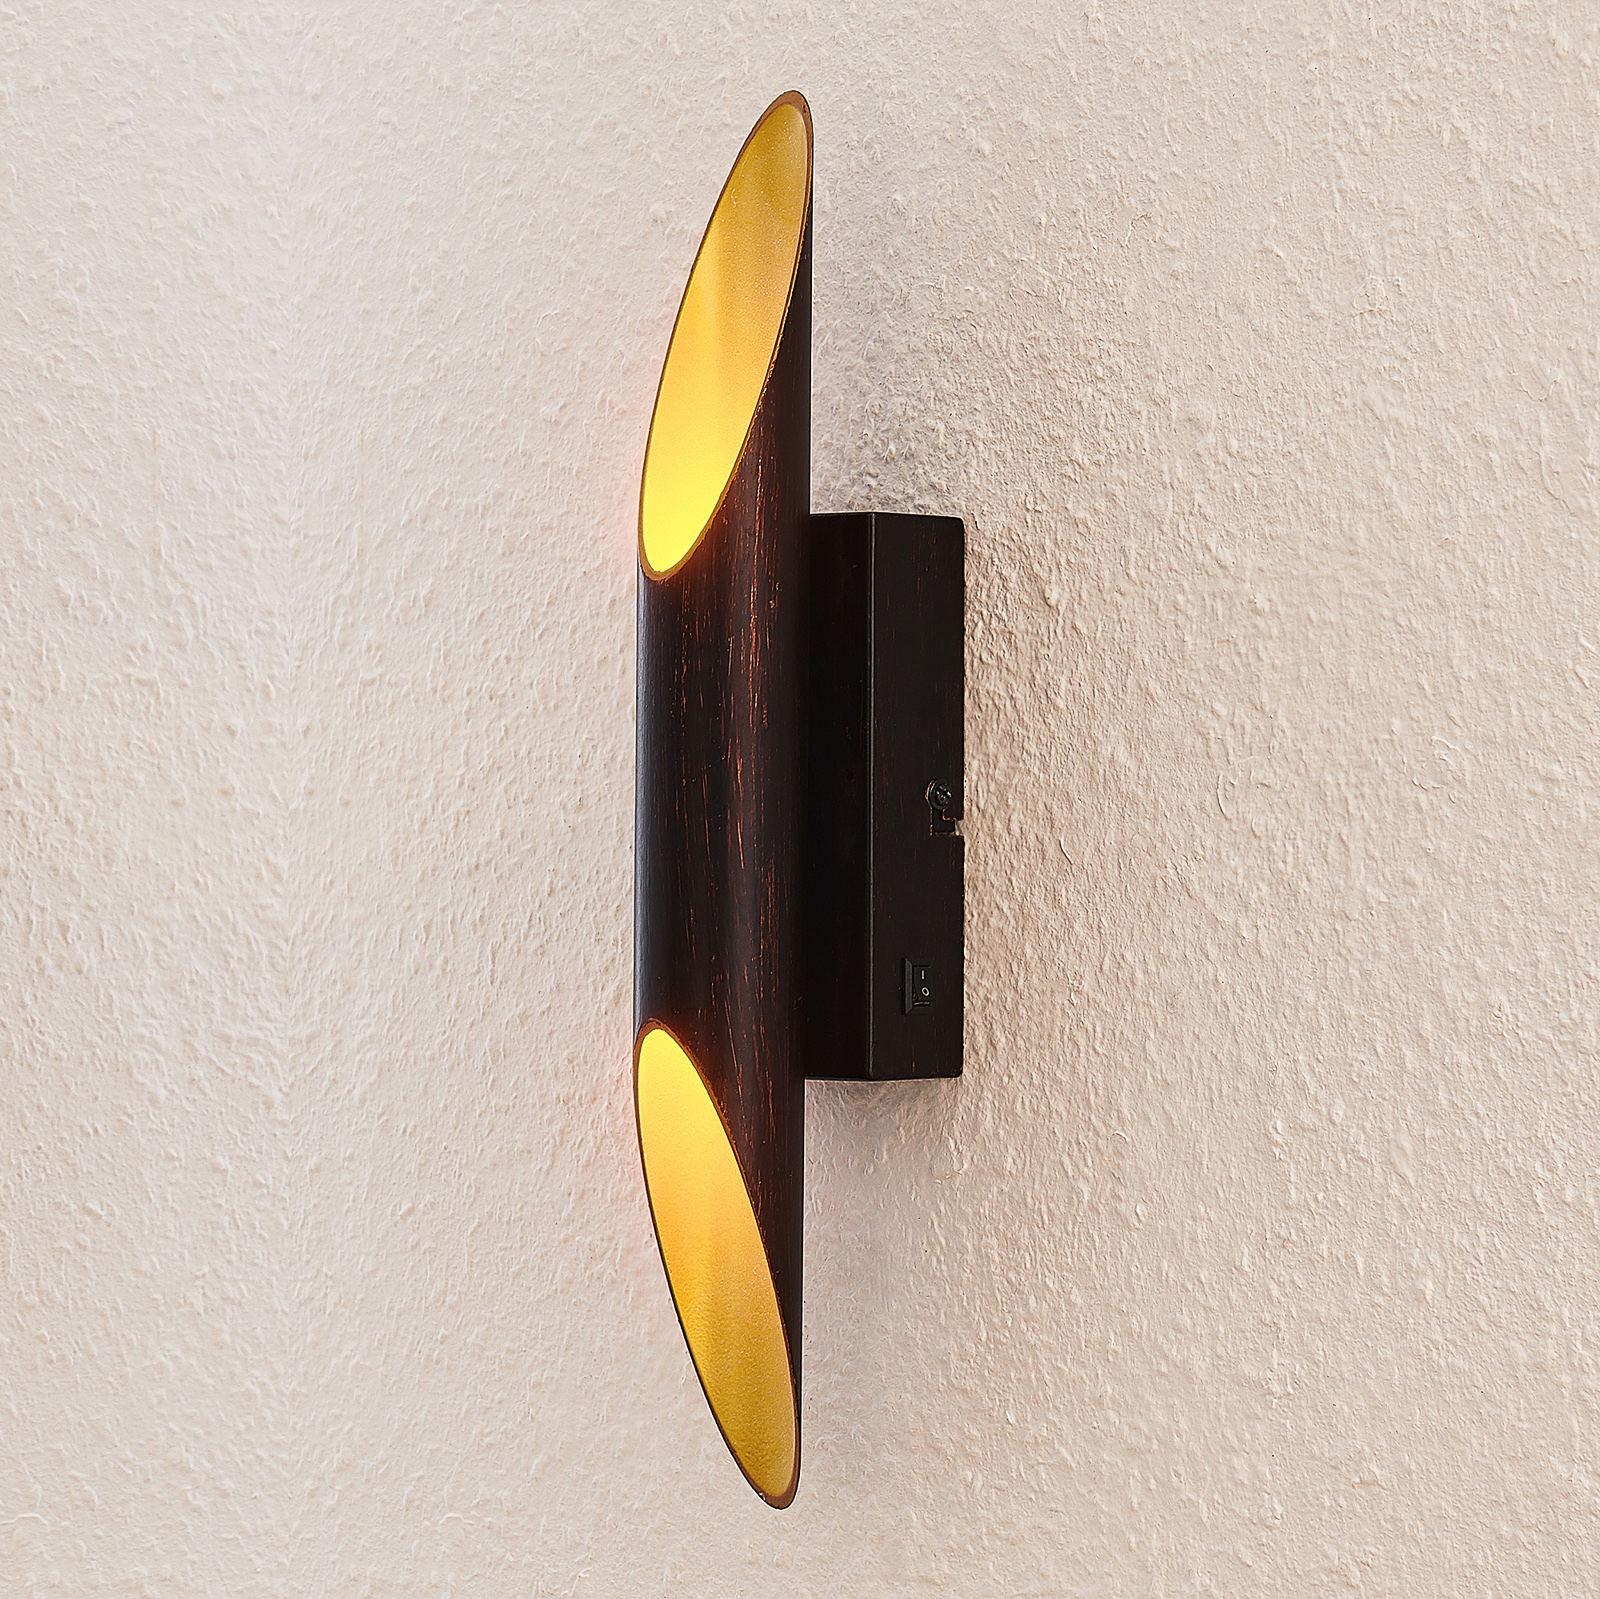 Lindby Solvina LED wall light, brown and gold